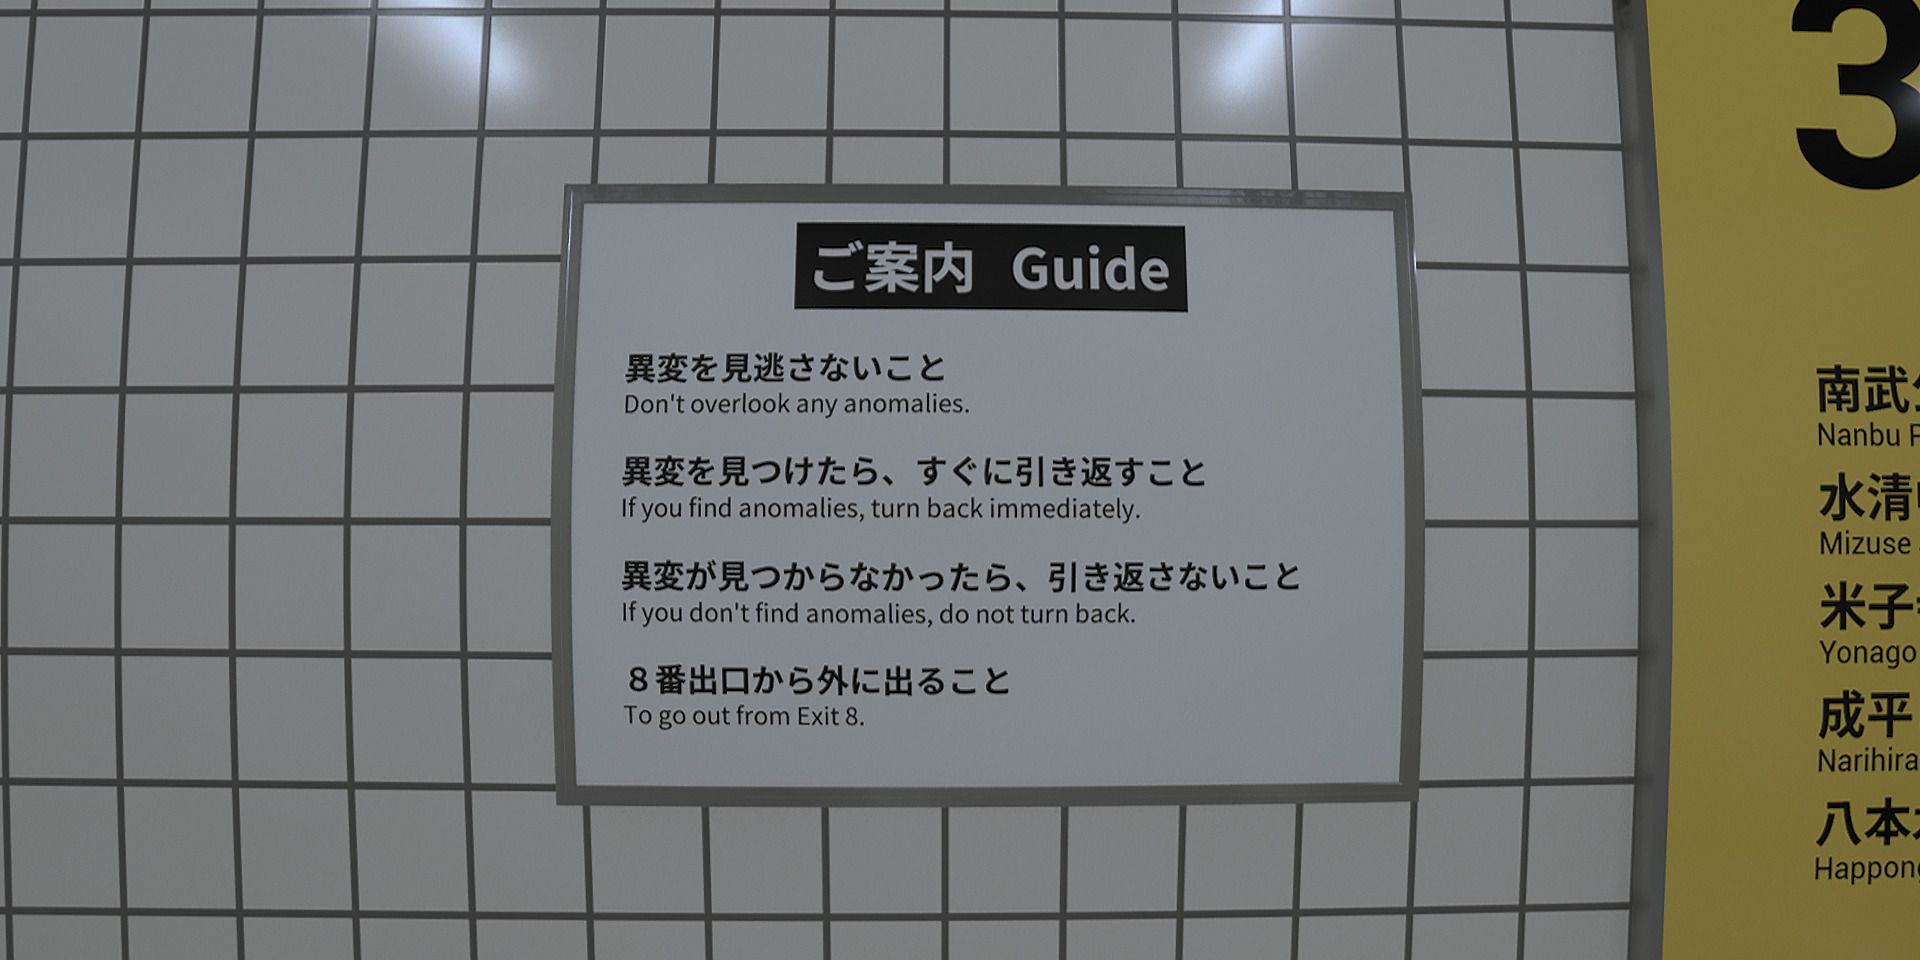 Image of the guide in The Exit 8